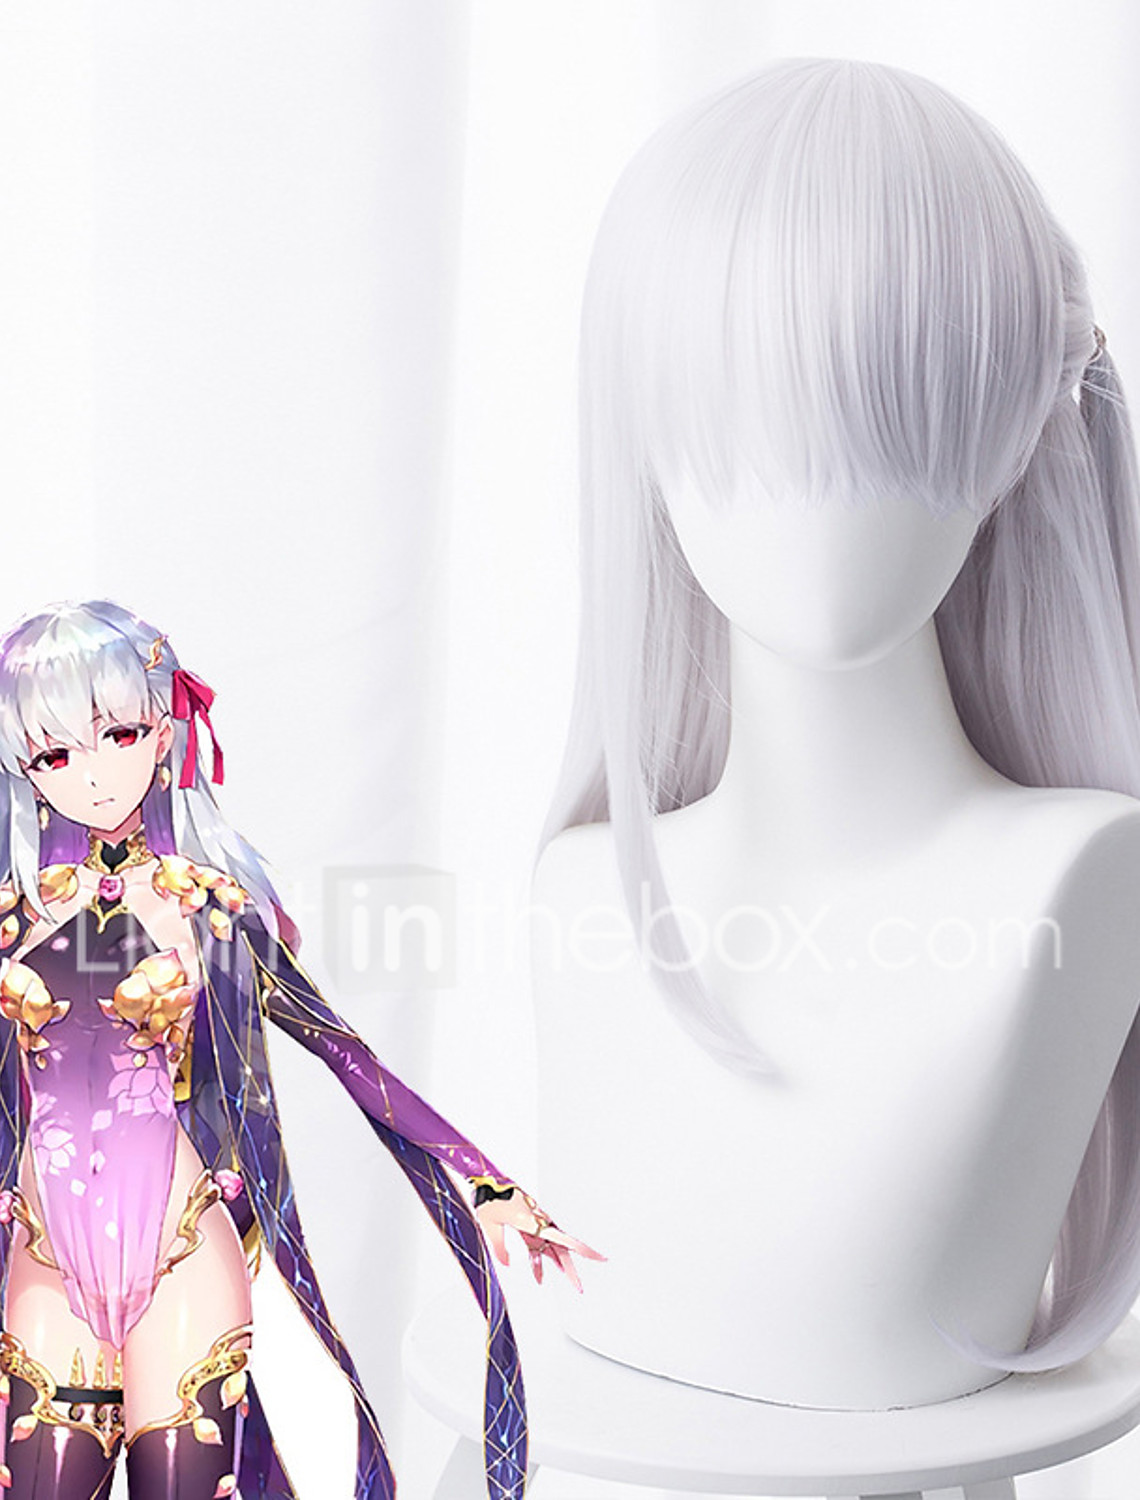 Details about  / Fate Grand//Order FGO Anime Light Gray Cosplay Bun Wig Hair Periwig 120CM